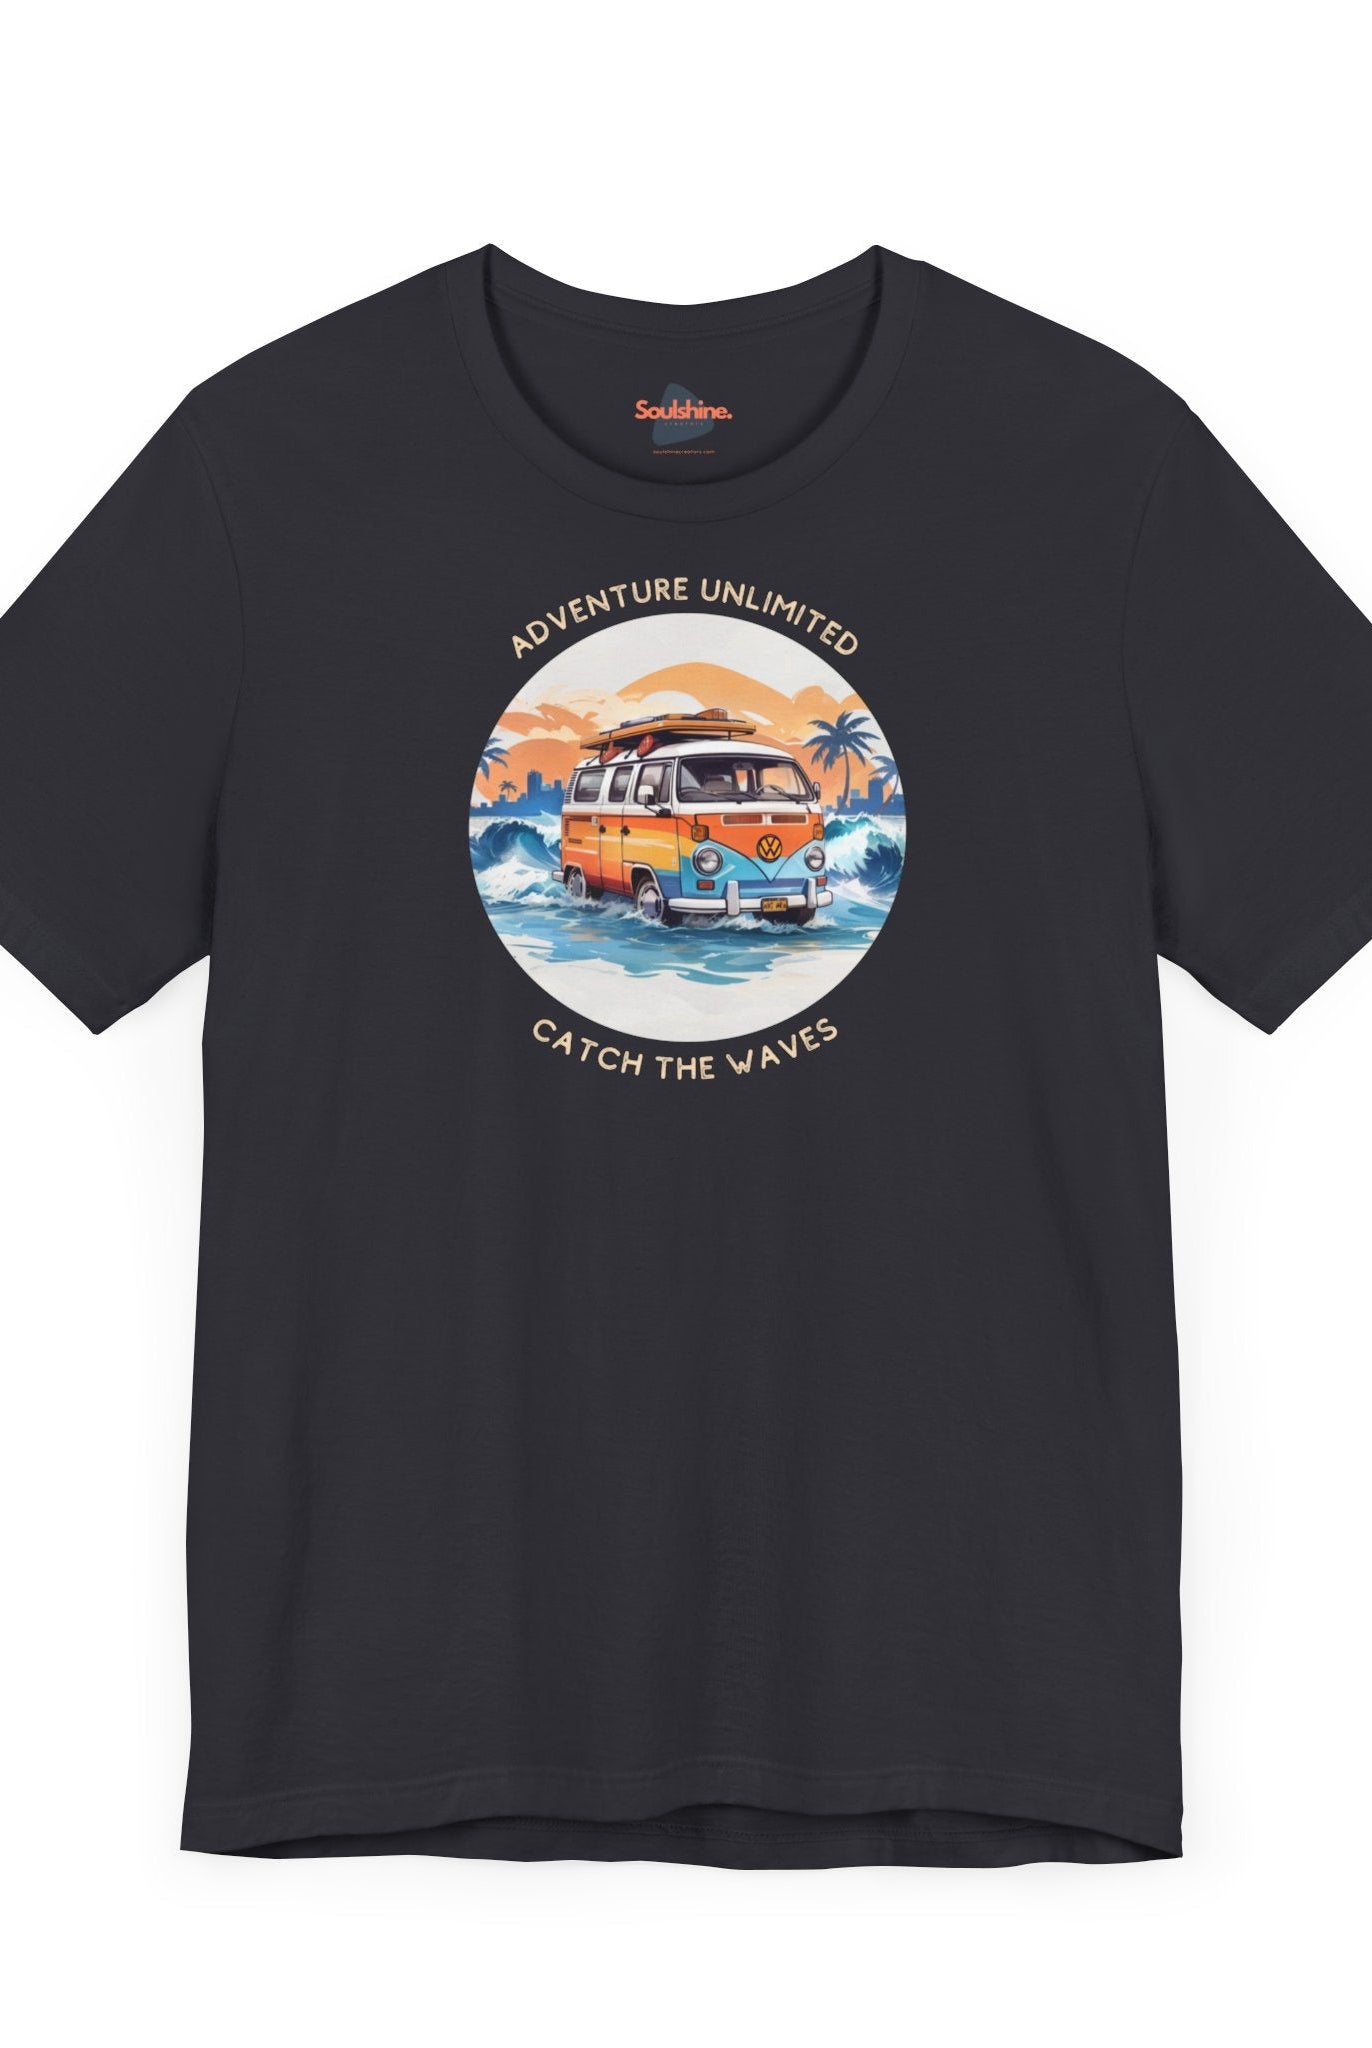 Adventure Unlimited - Surfing T-Shirt - printed black tee with ’Soulshinecreators’ design